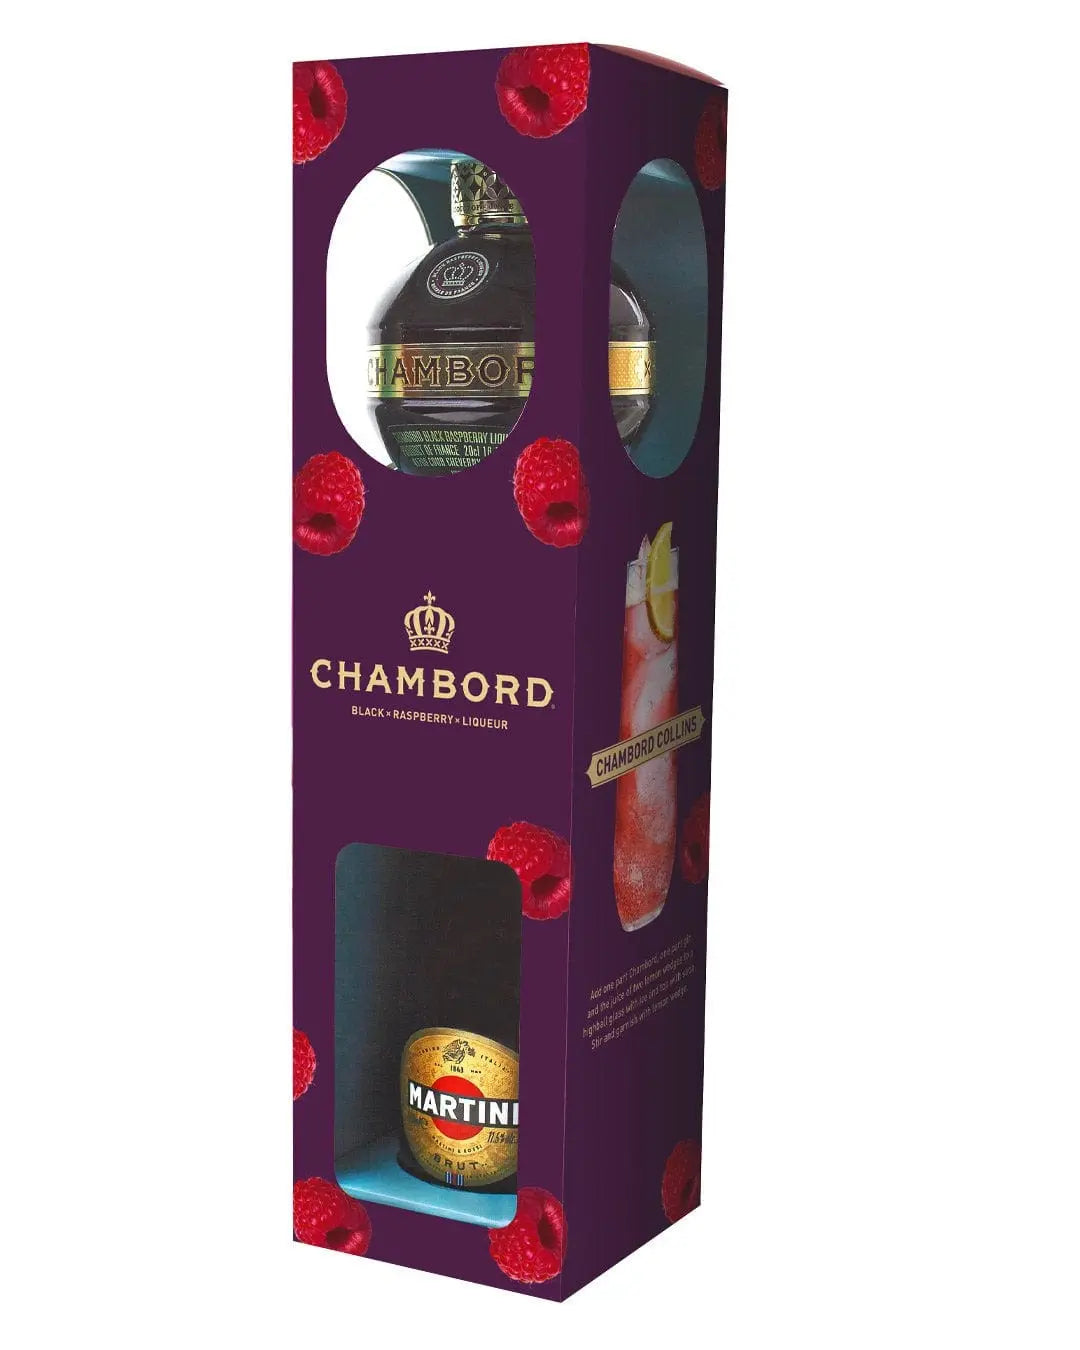 Chambord & Martini Prosecco Gift Pack, 2 x 20 cl Liqueurs & Other Spirits